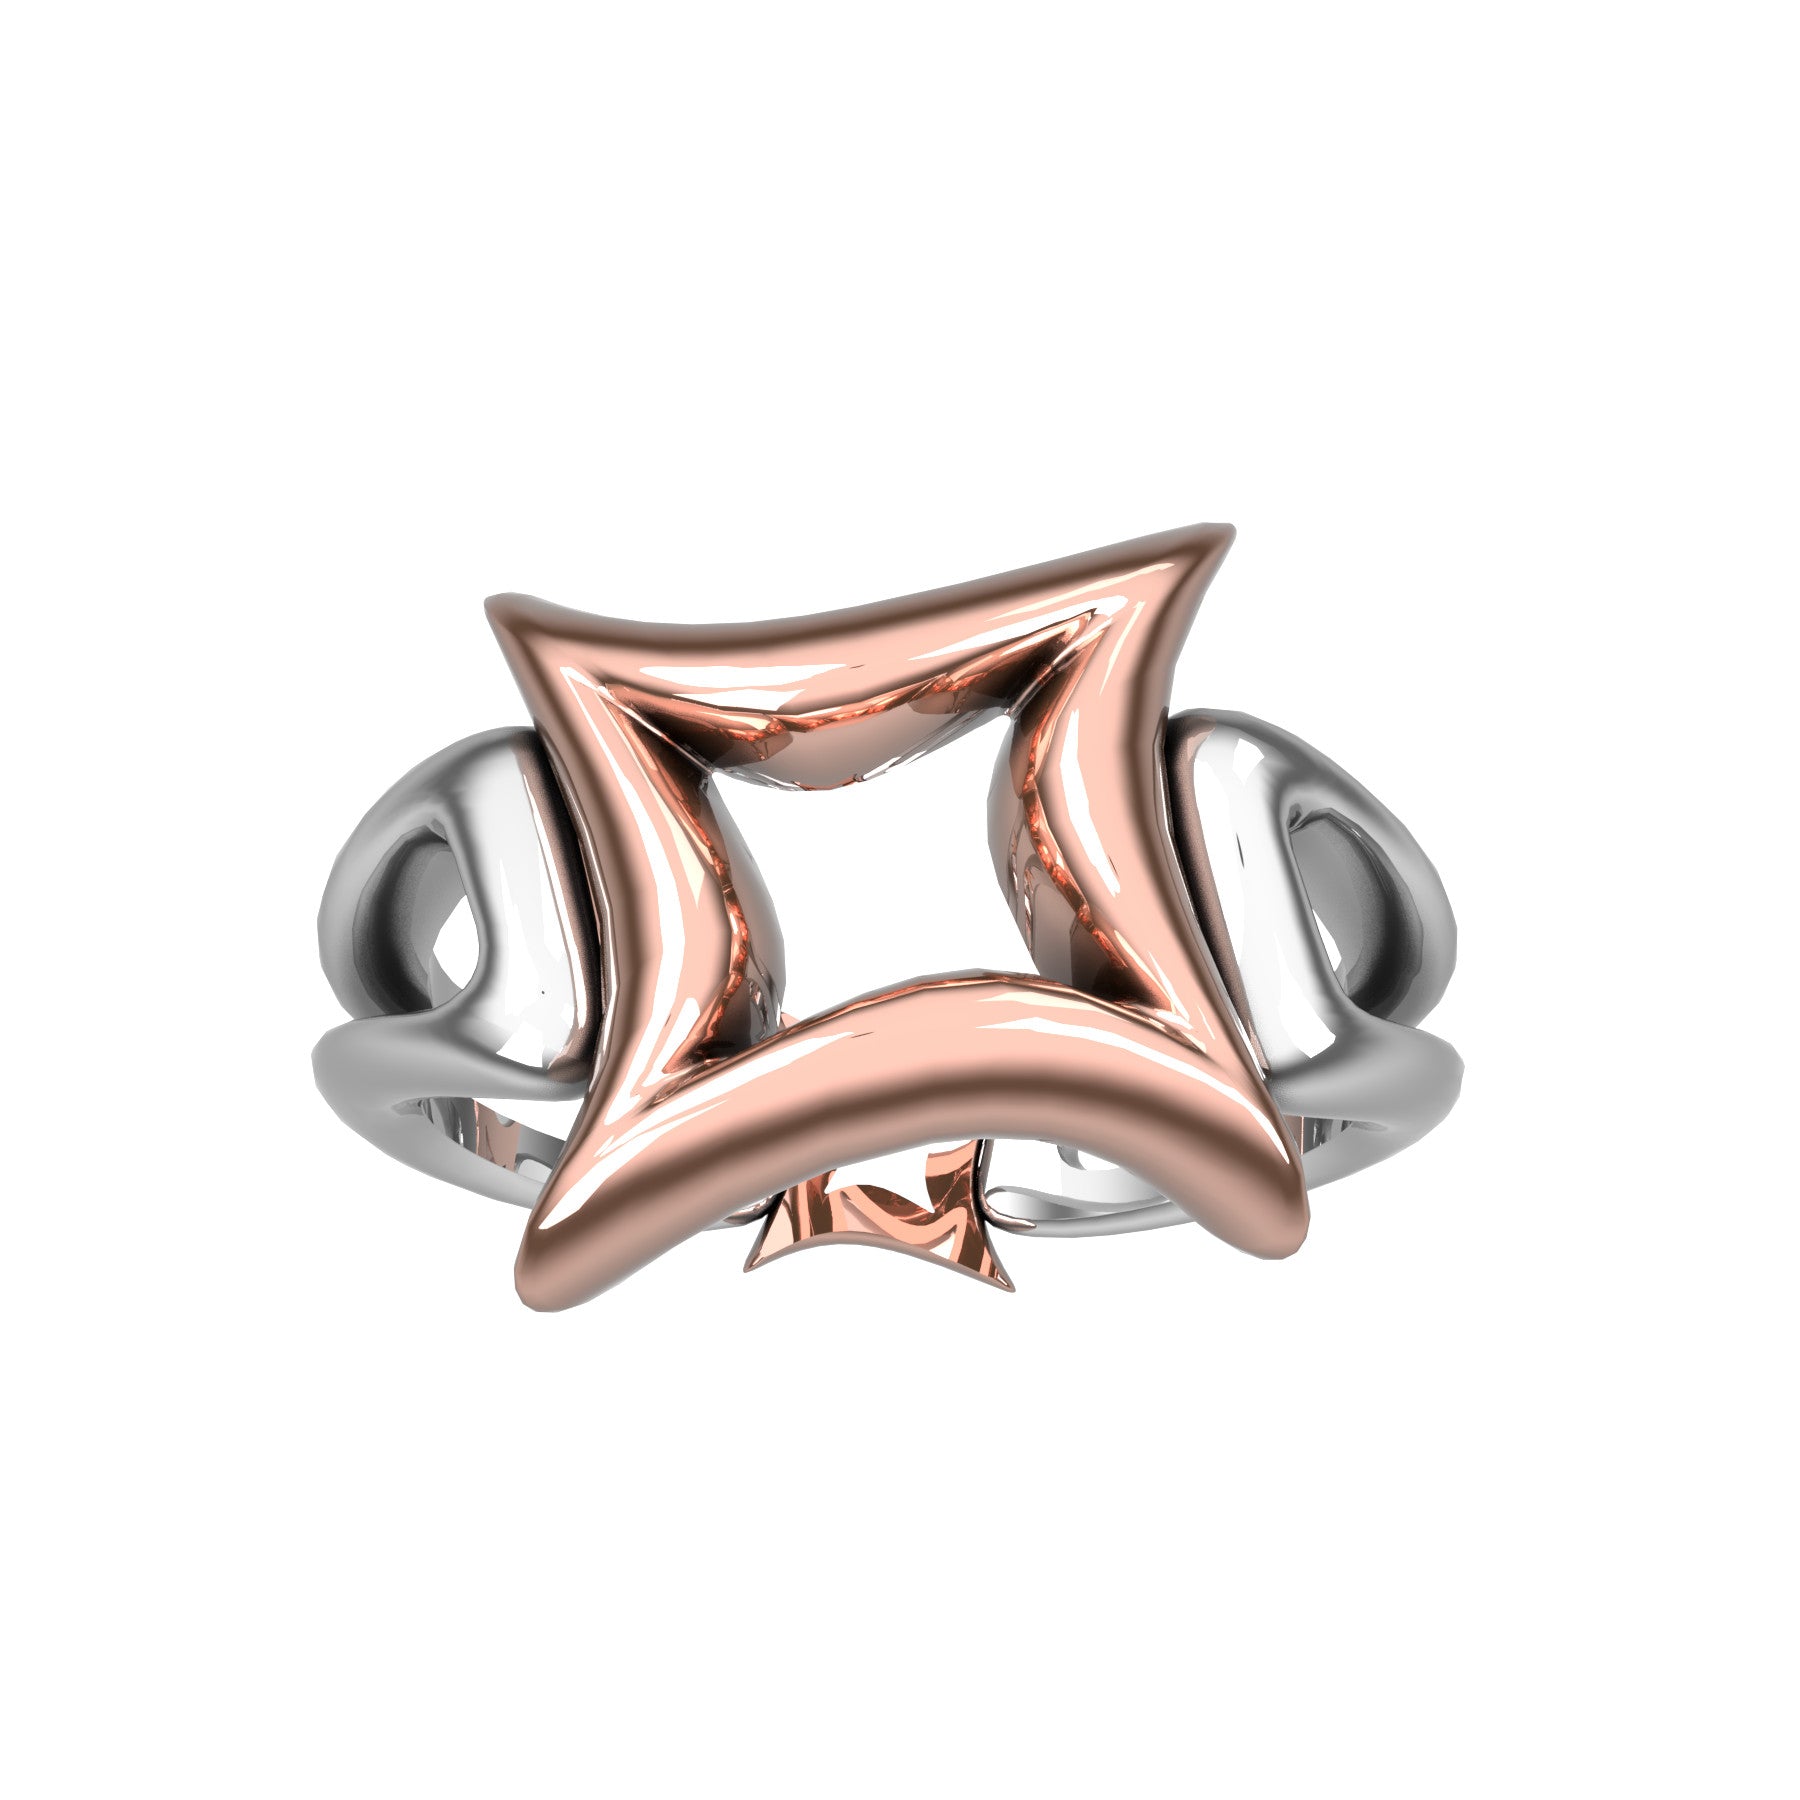 etoile bizarre ring, 18 K white and pink gold, weight about 5,6 g. (0.20 oz), width 13,5 mm max